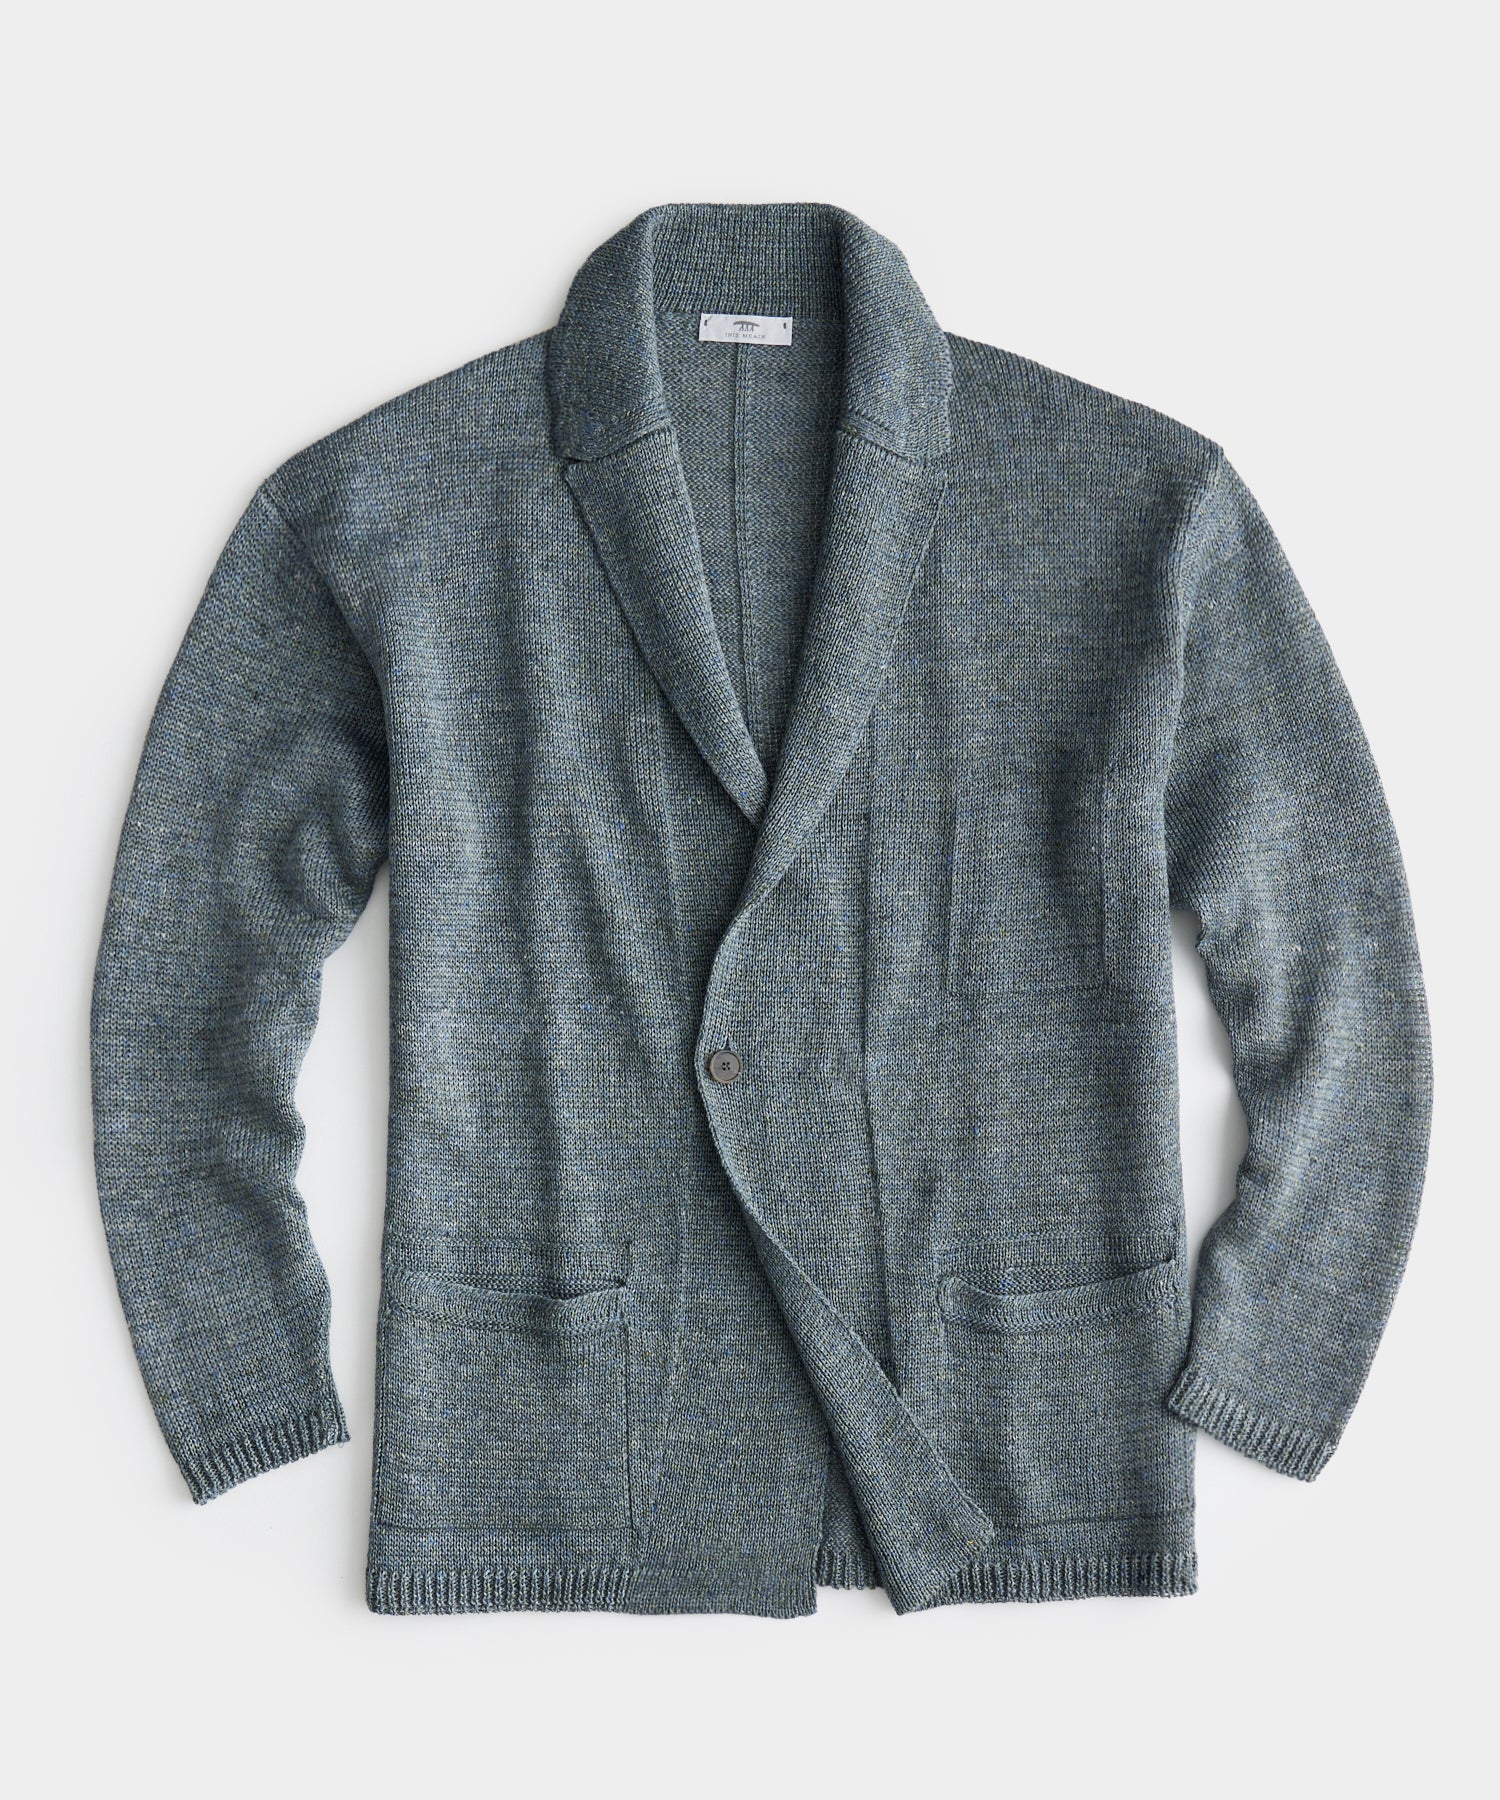 Inis Meáin Relax Jacket in Oyster